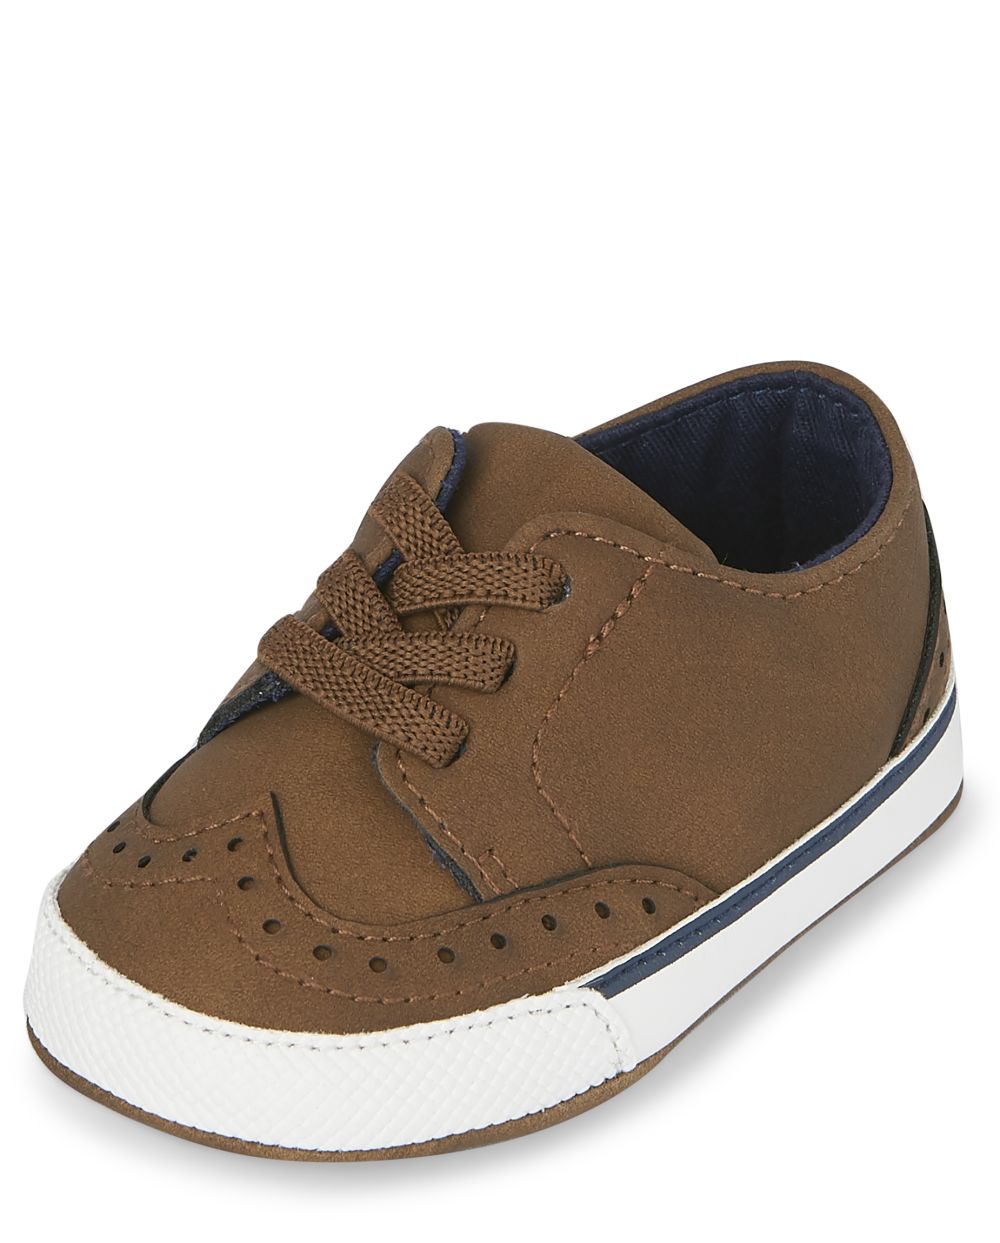 

Newborn Baby Boys Oxford Sneakers - Tan - The Children's Place